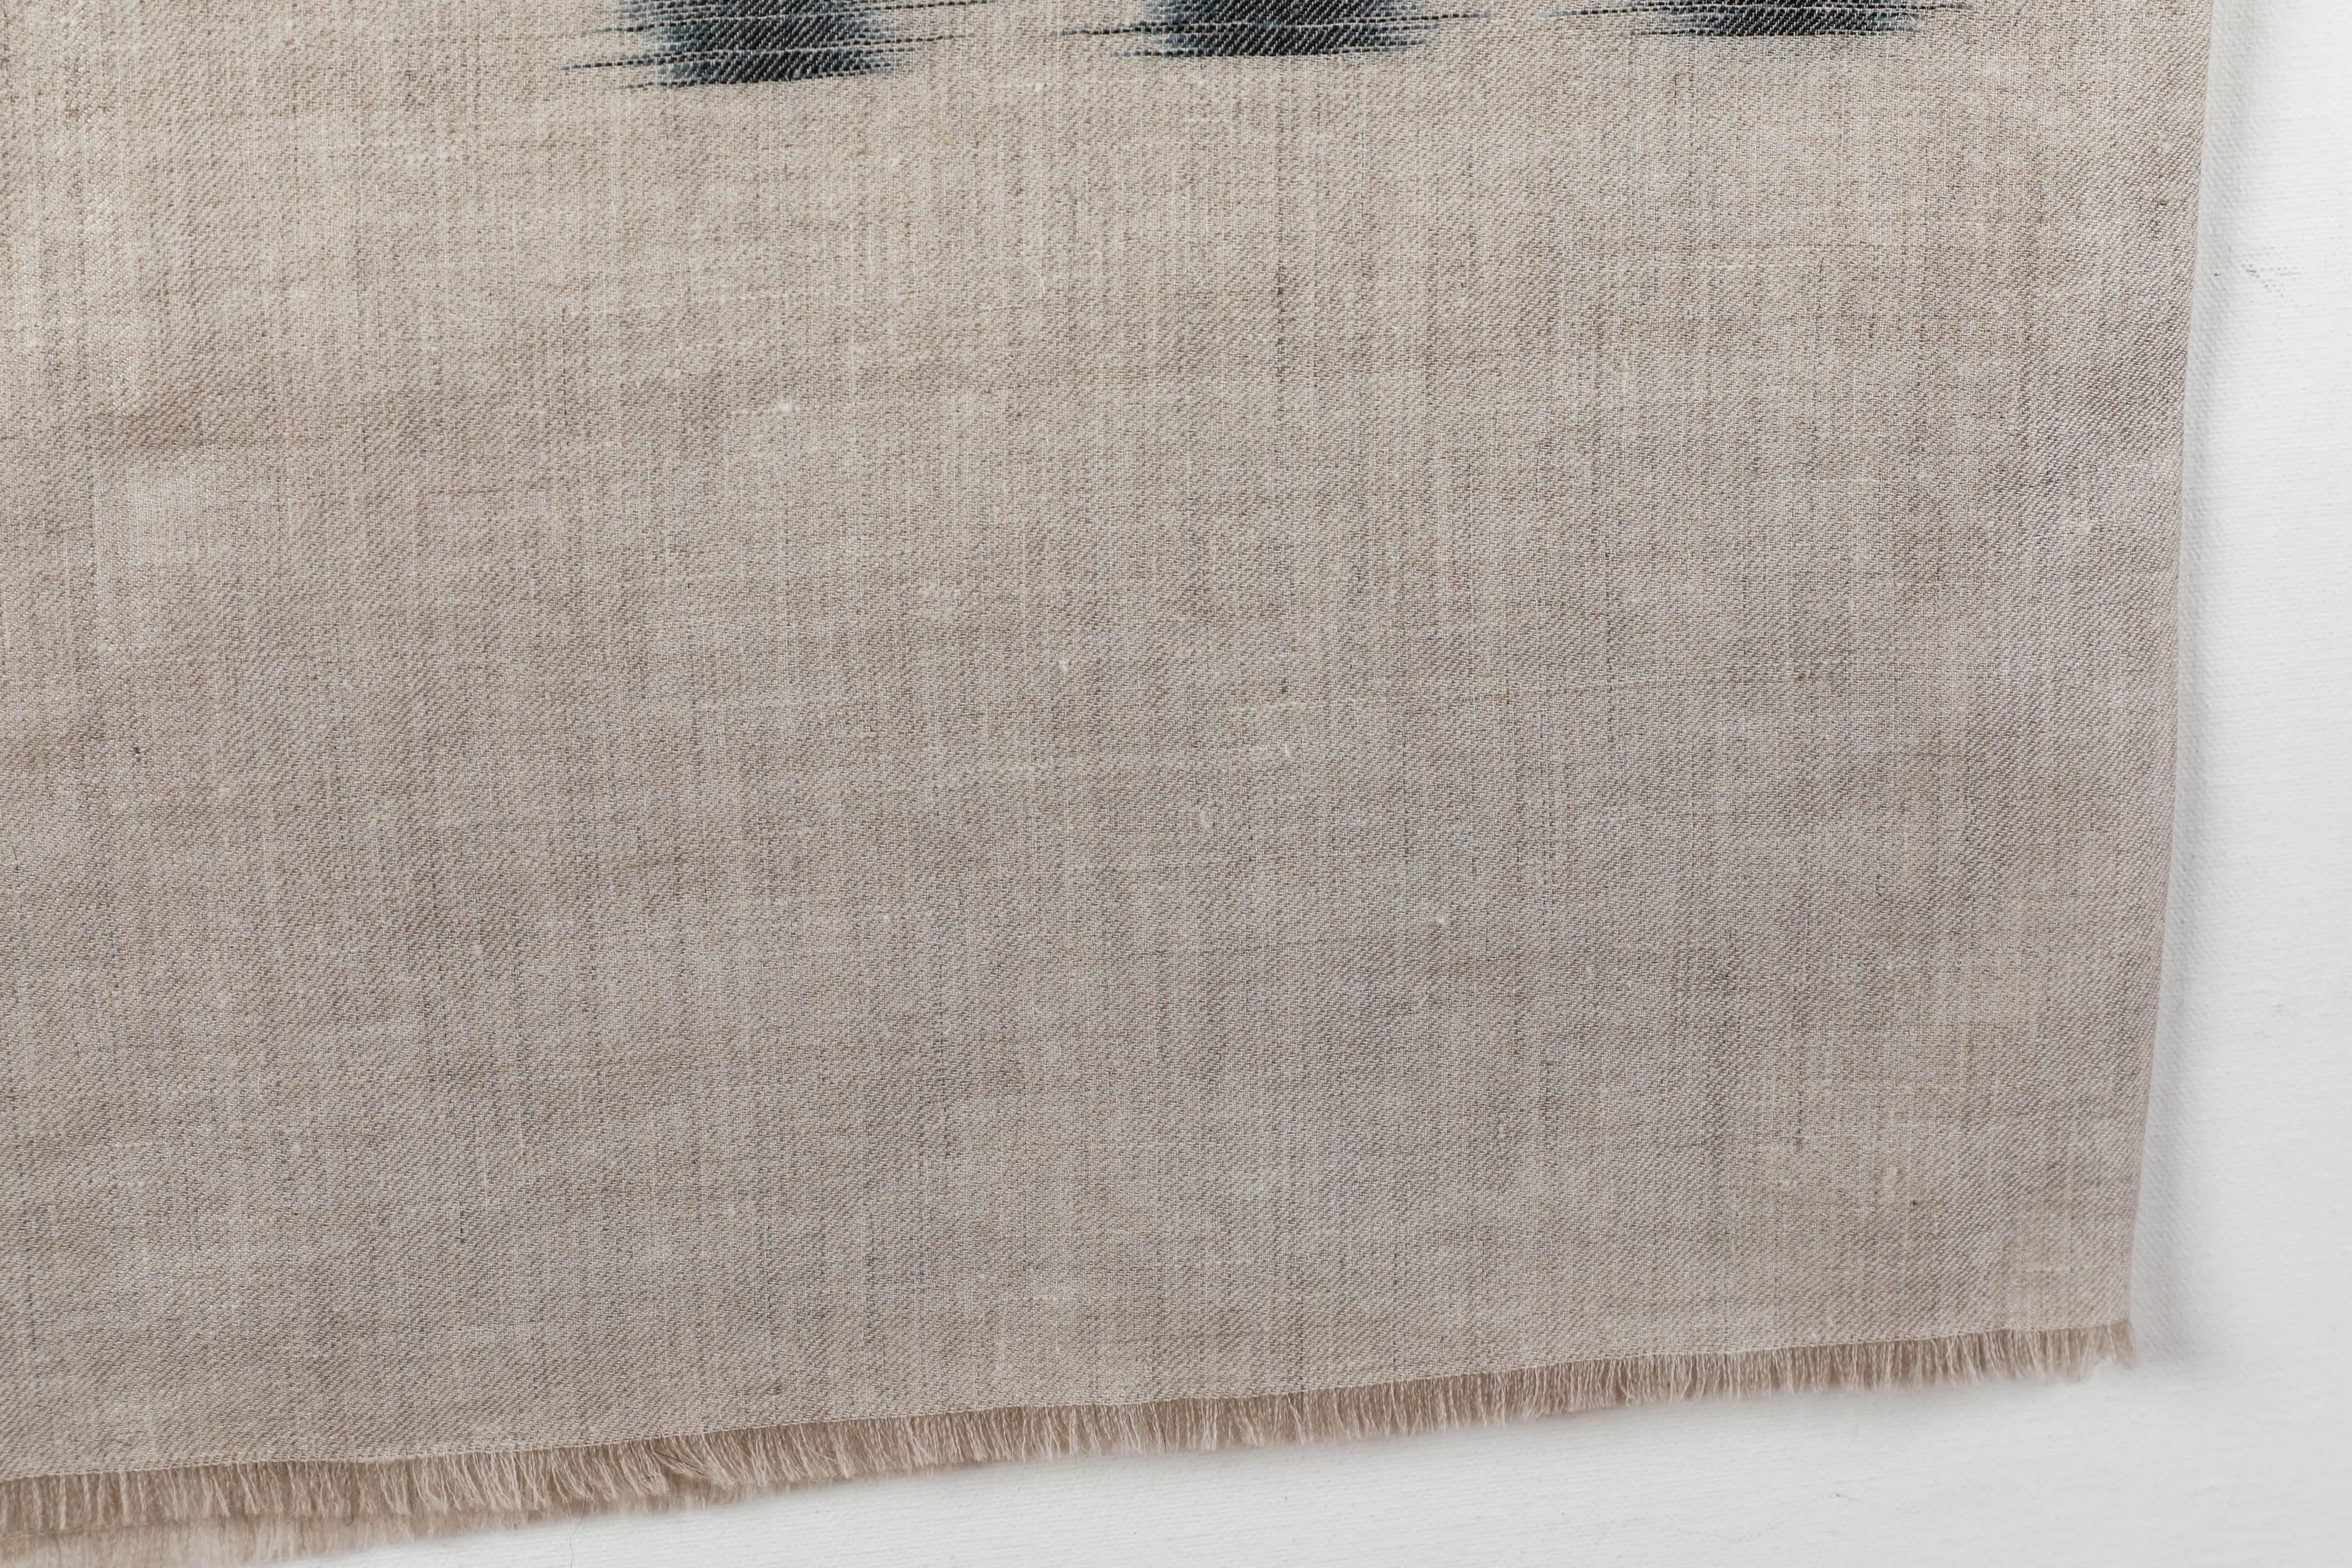 Ikat Woven Cashmere Throw 1